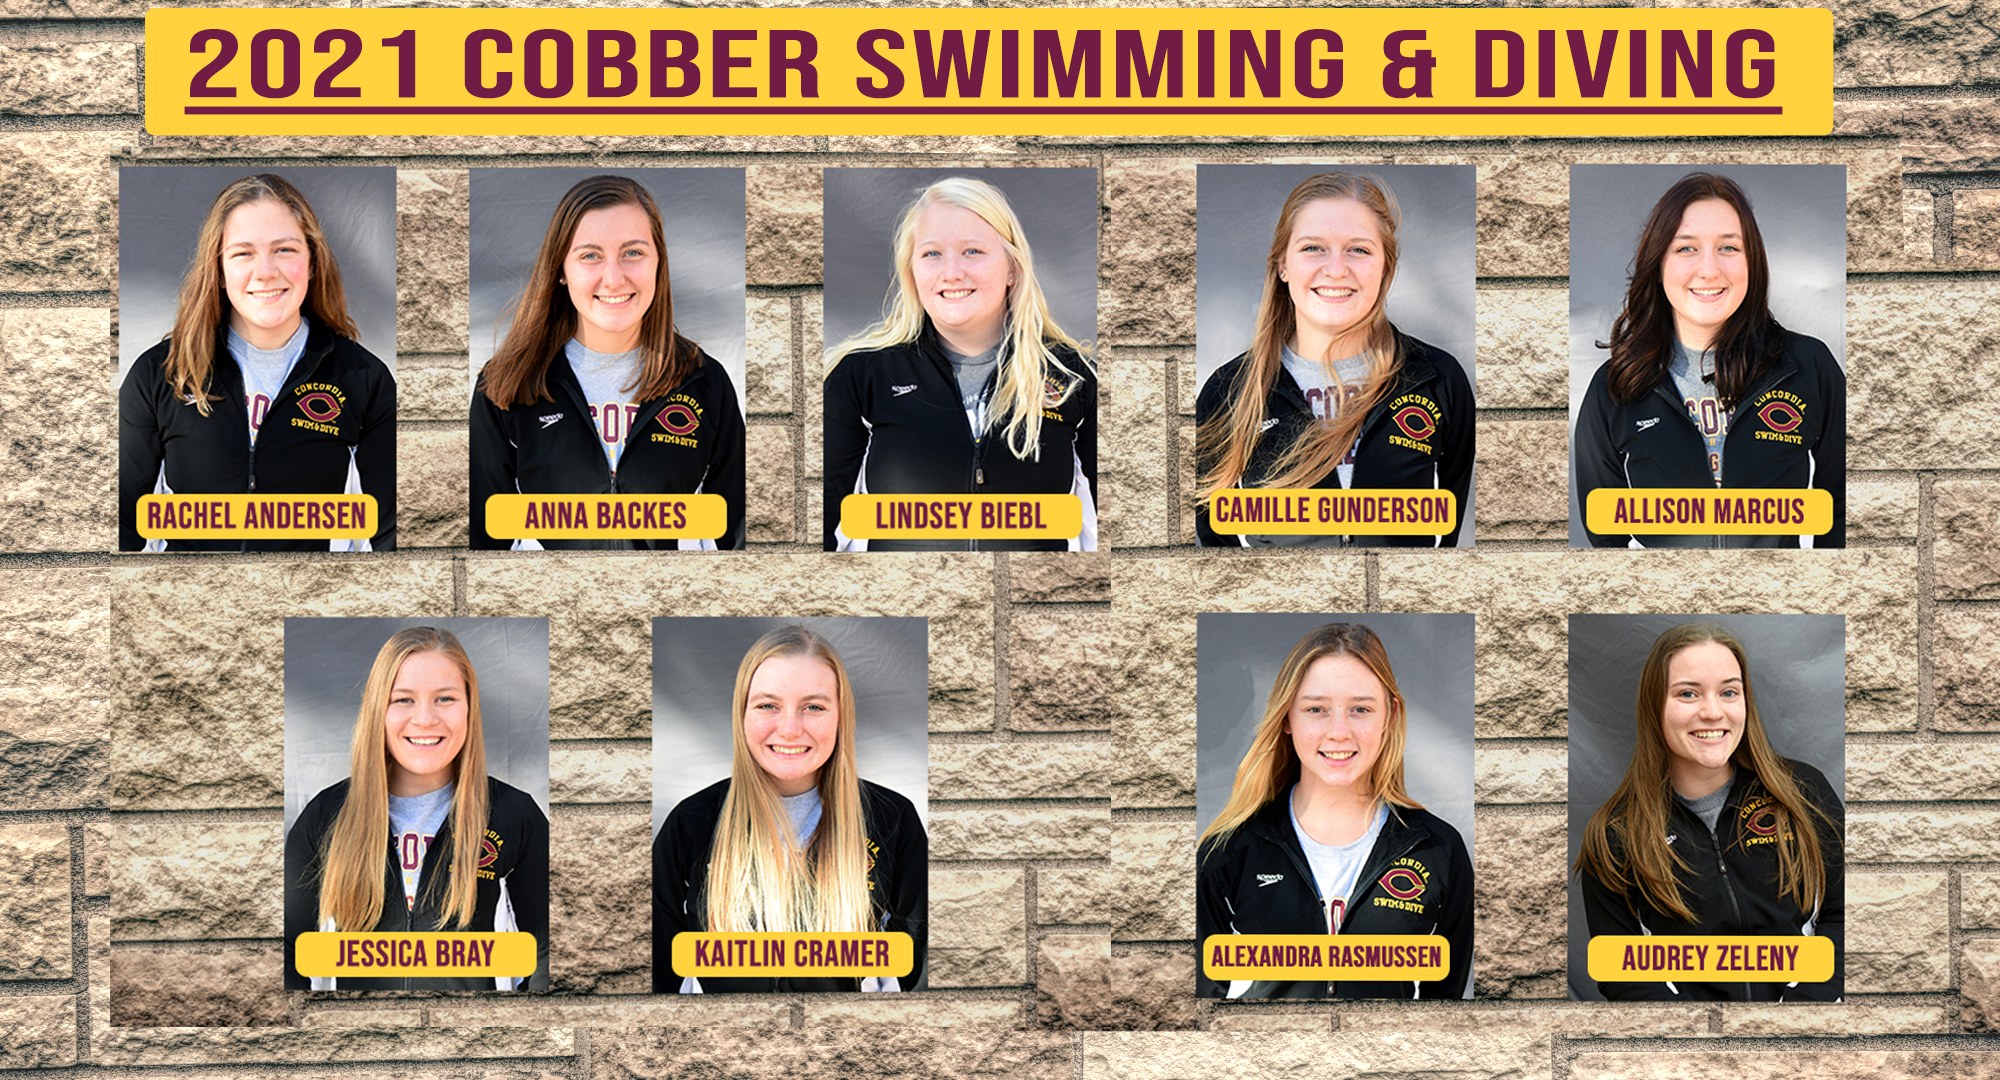 The 2021 Cobber swimming and diving team